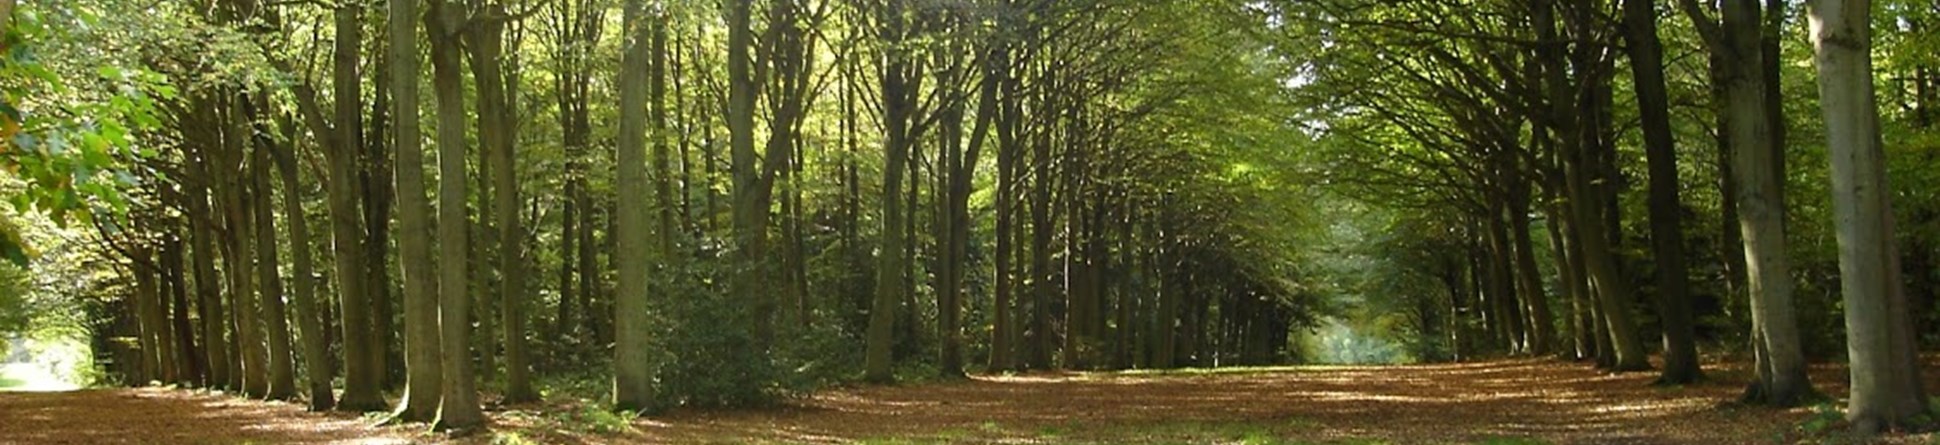 Canopies of beech trees shown forming into a V in a long avenue.